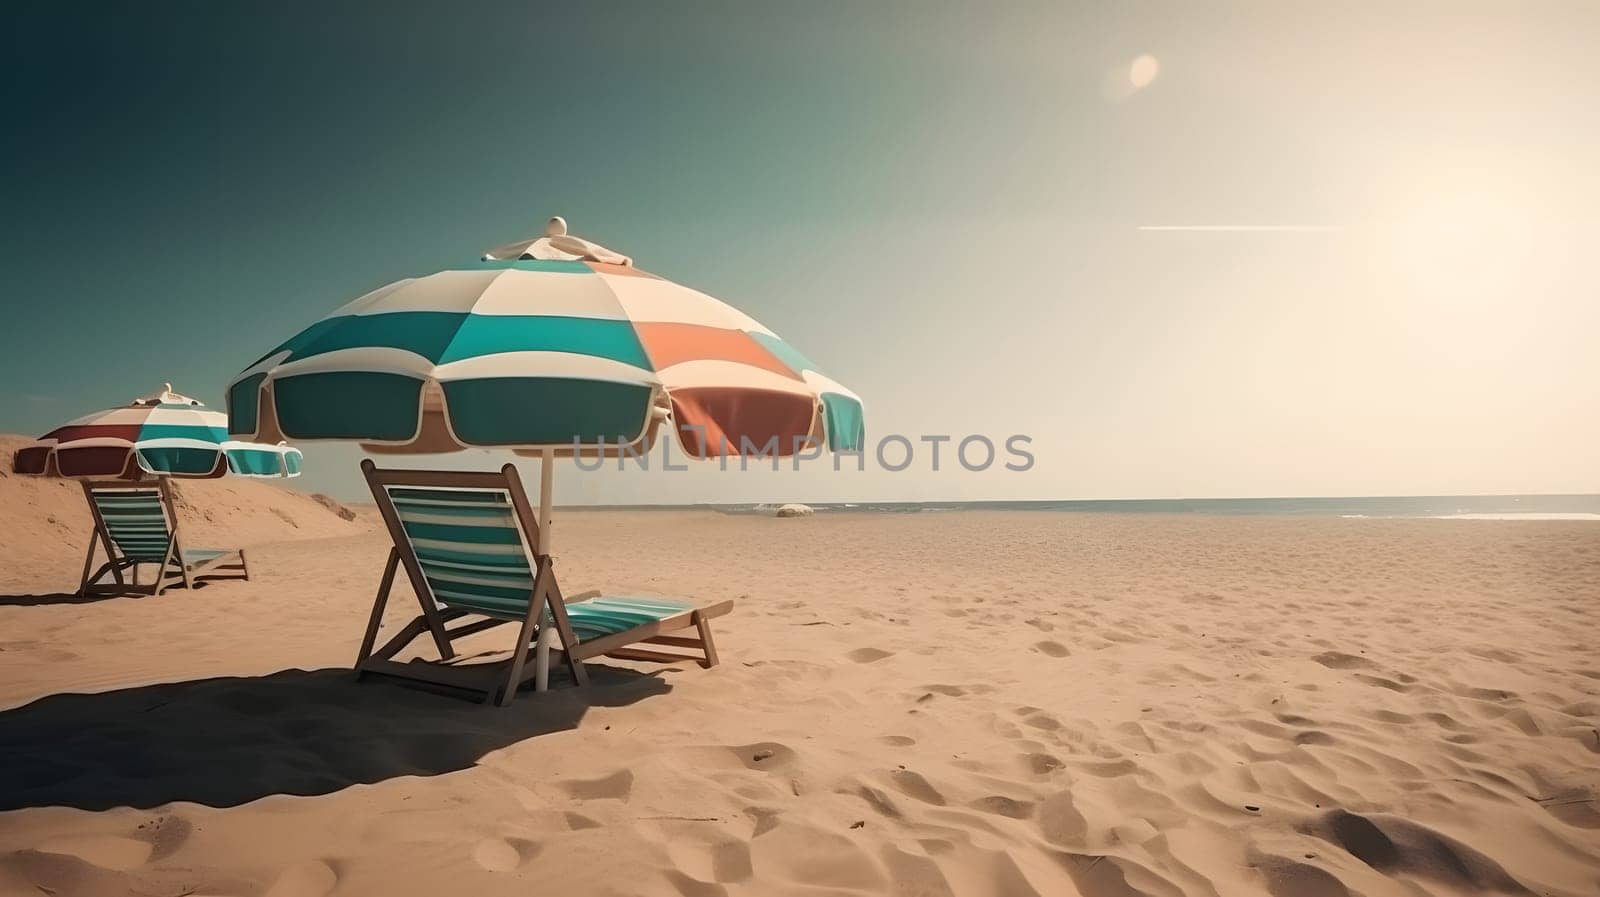 Beach umbrellas with chairs on the sand beach - summer vacation theme header, neural network generated art by z1b